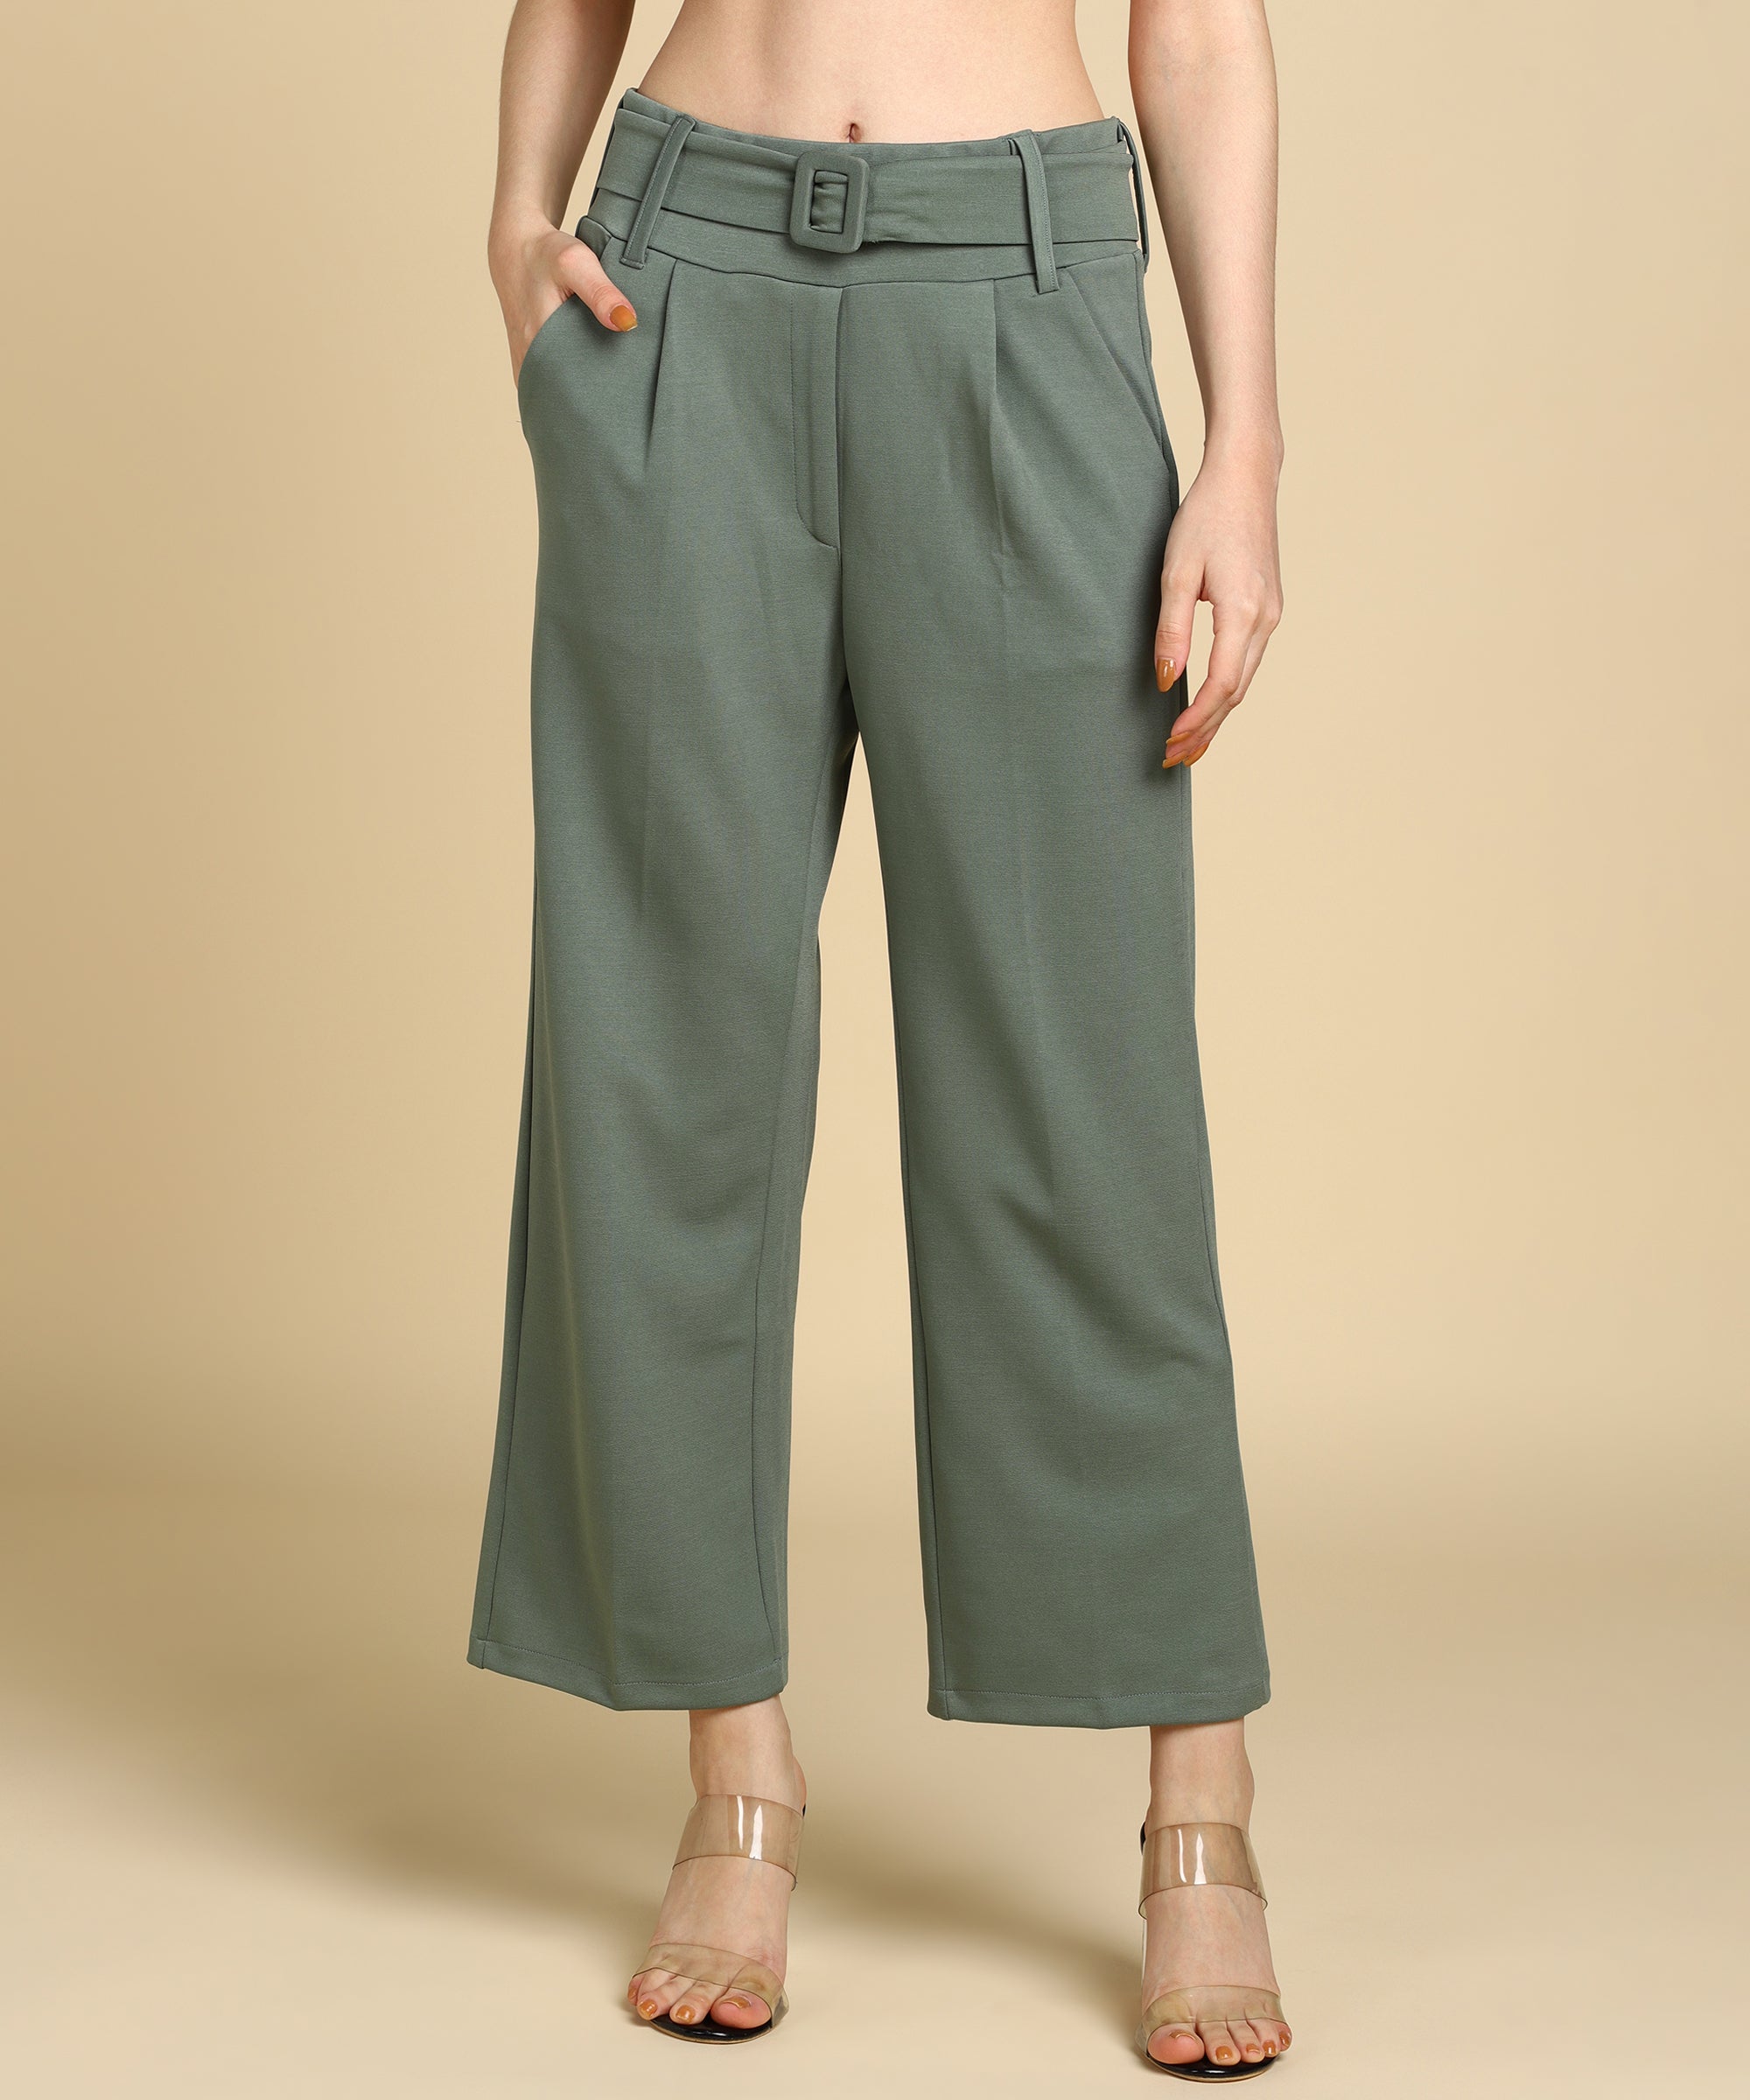 Women's Cecilie Mountain Softshell Pants Trail Green/Dark Olive Green | Buy  Women's Cecilie Mountain Softshell Pants Trail Green/Dark Olive Green here  | Outnorth